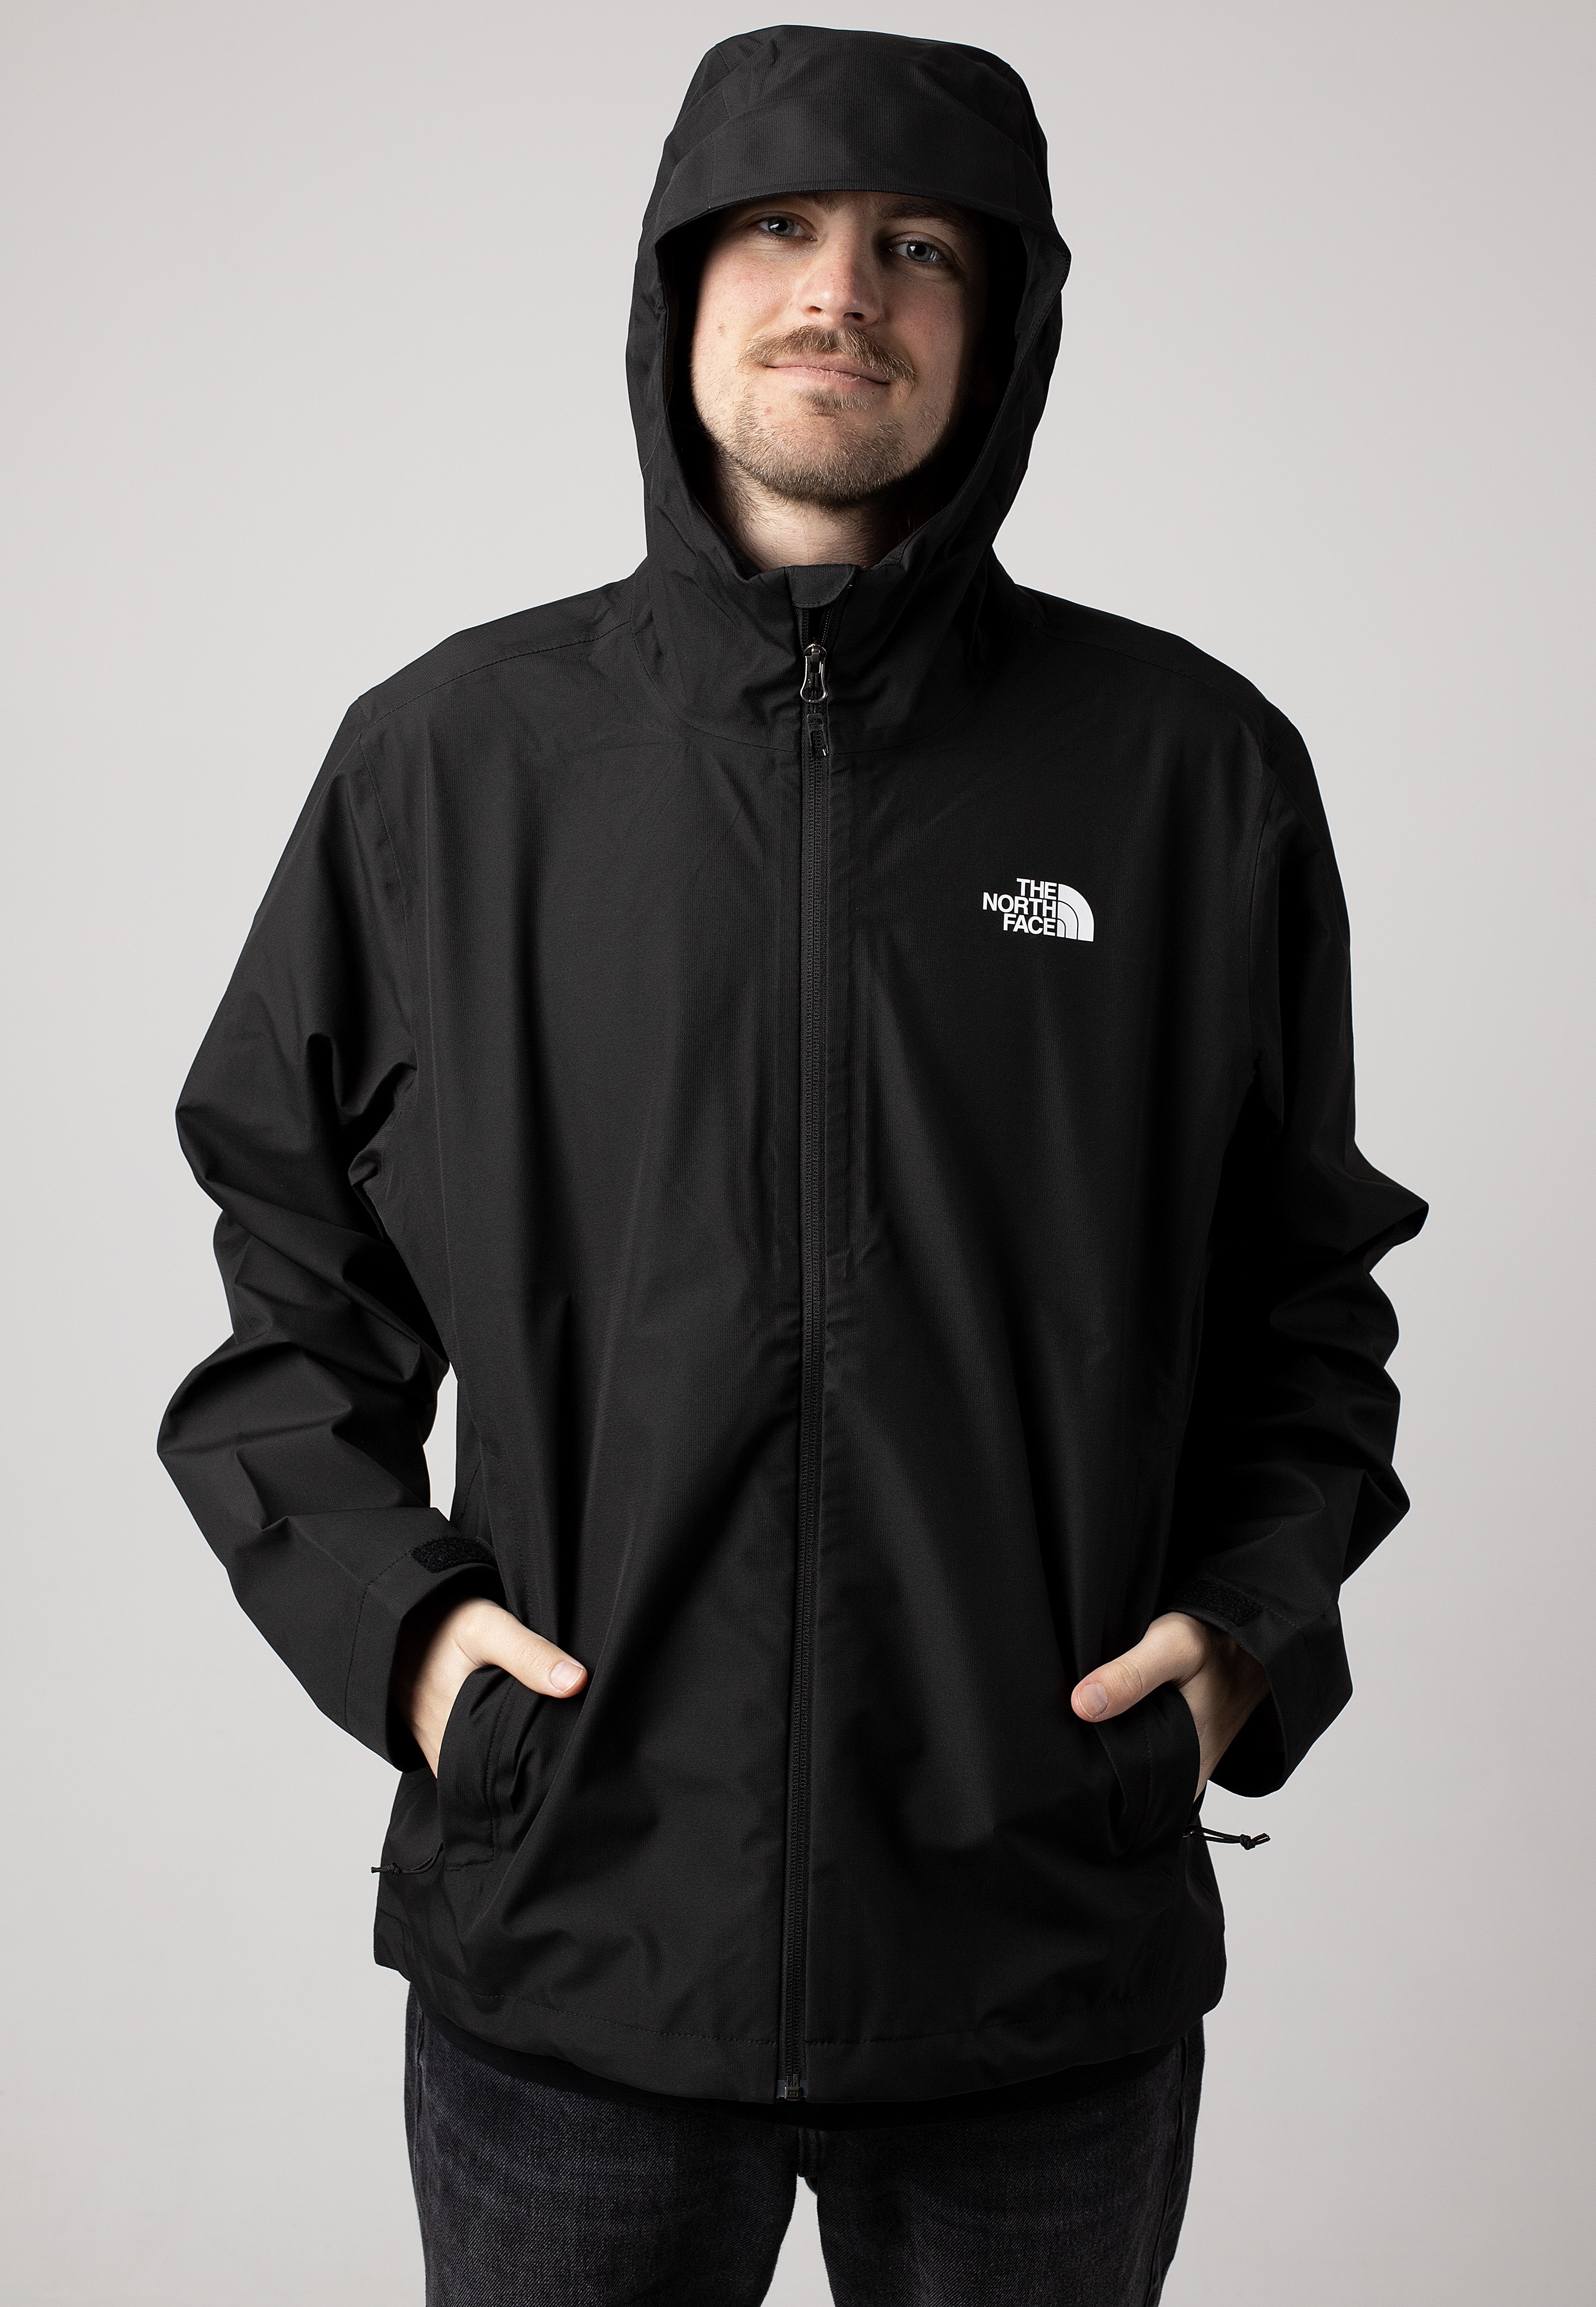 The North Face - Whiton 3L Tnf Black - Jacket